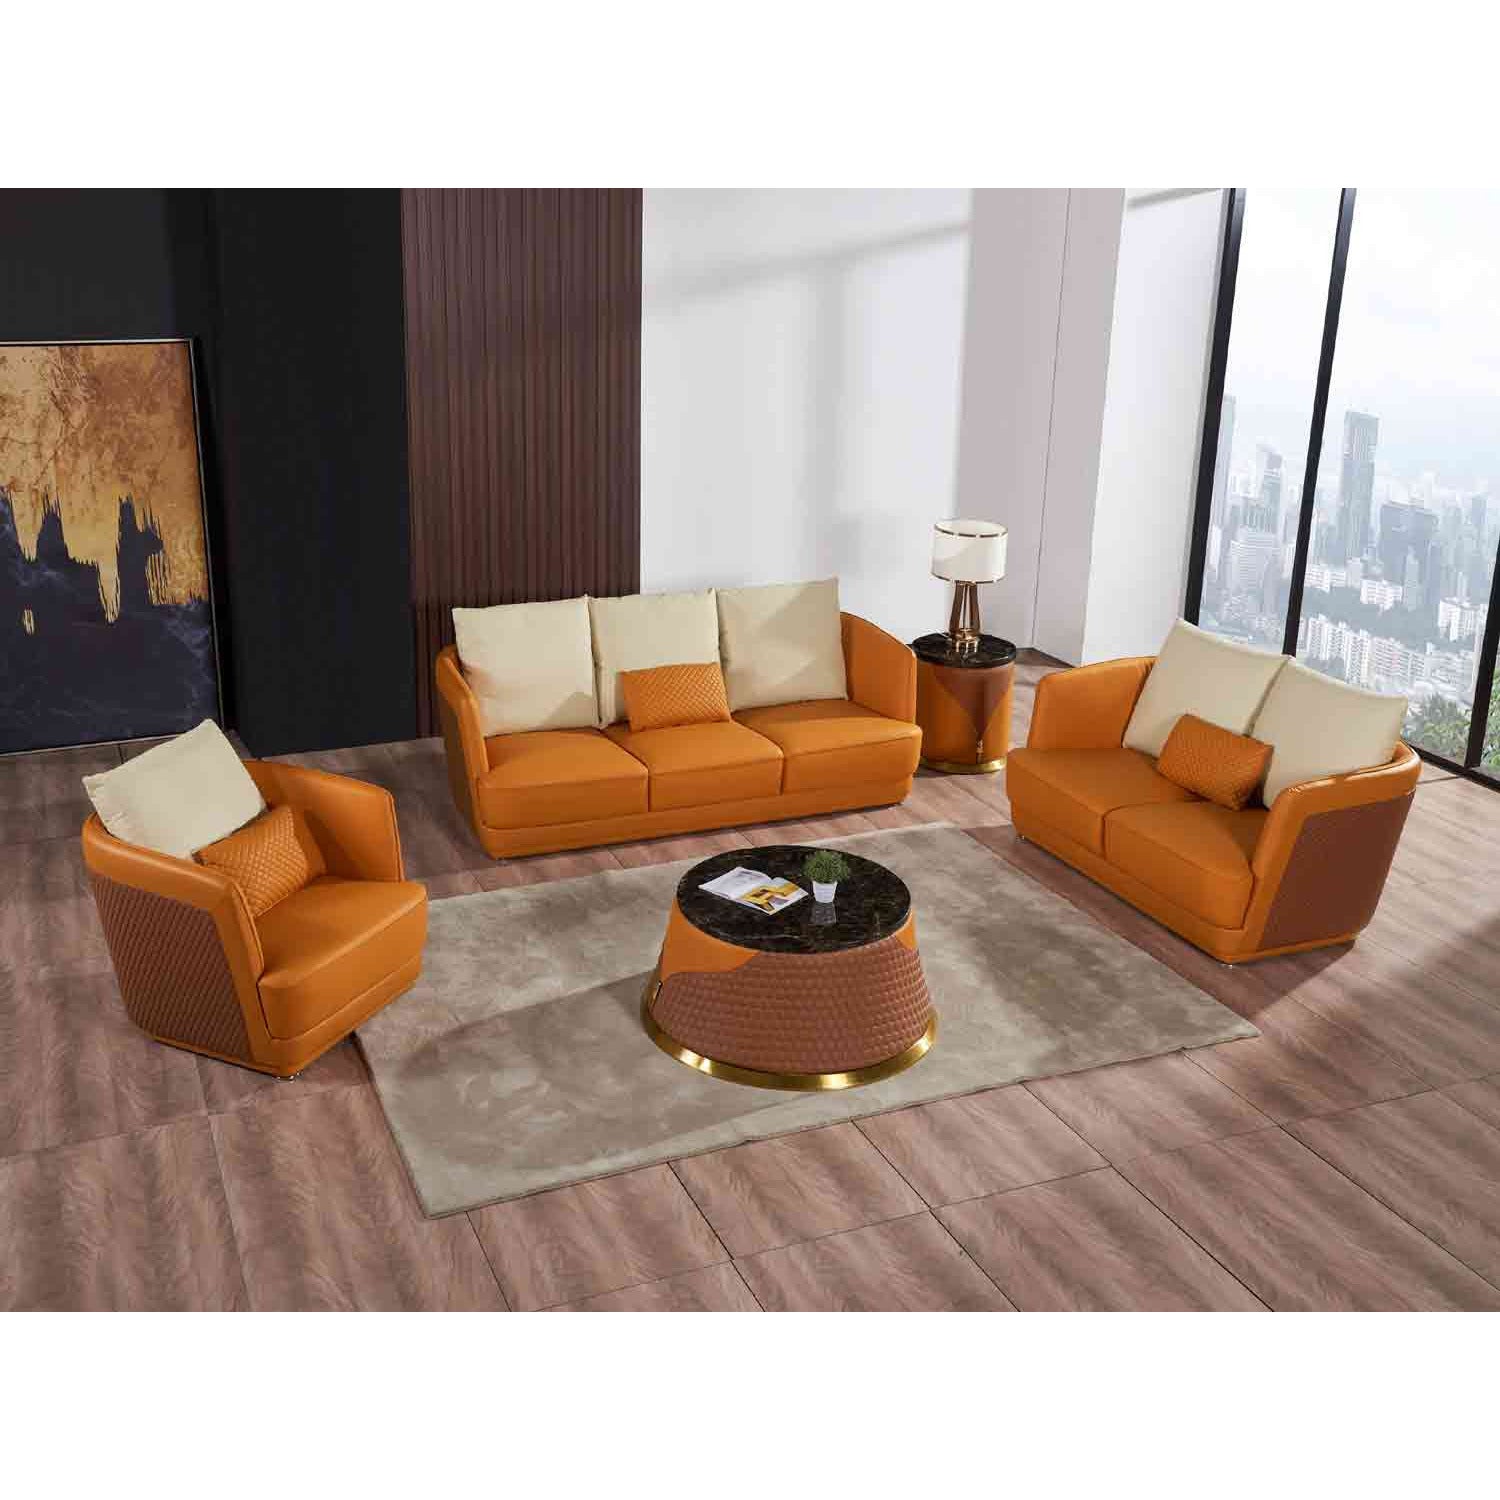 European Furniture - Glamour End Table in Orange-Brown - 51619-ET - New Star Living